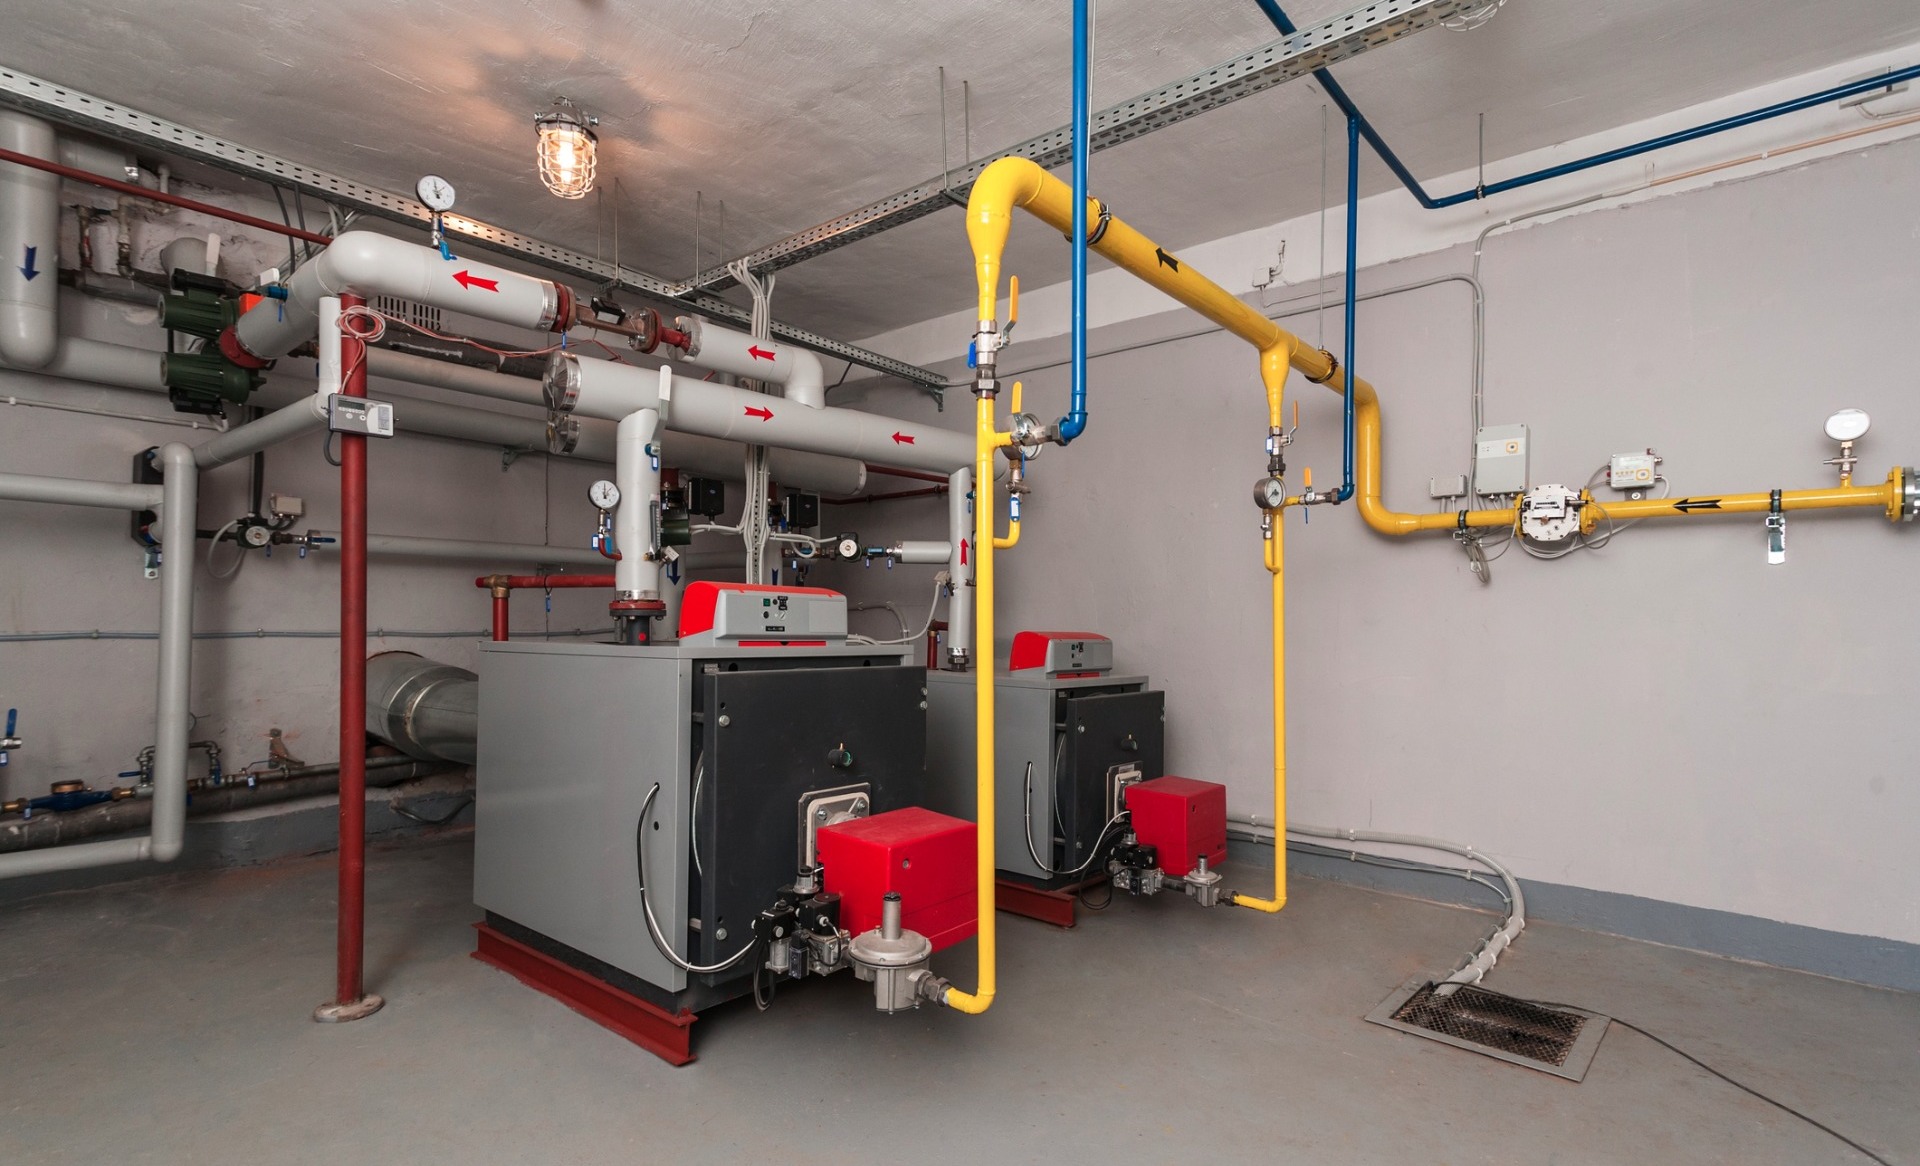 plumber Hinckley & Heating Engineer in Hinkley. Image of gas boiler service & repair and landlord gas safety inspections